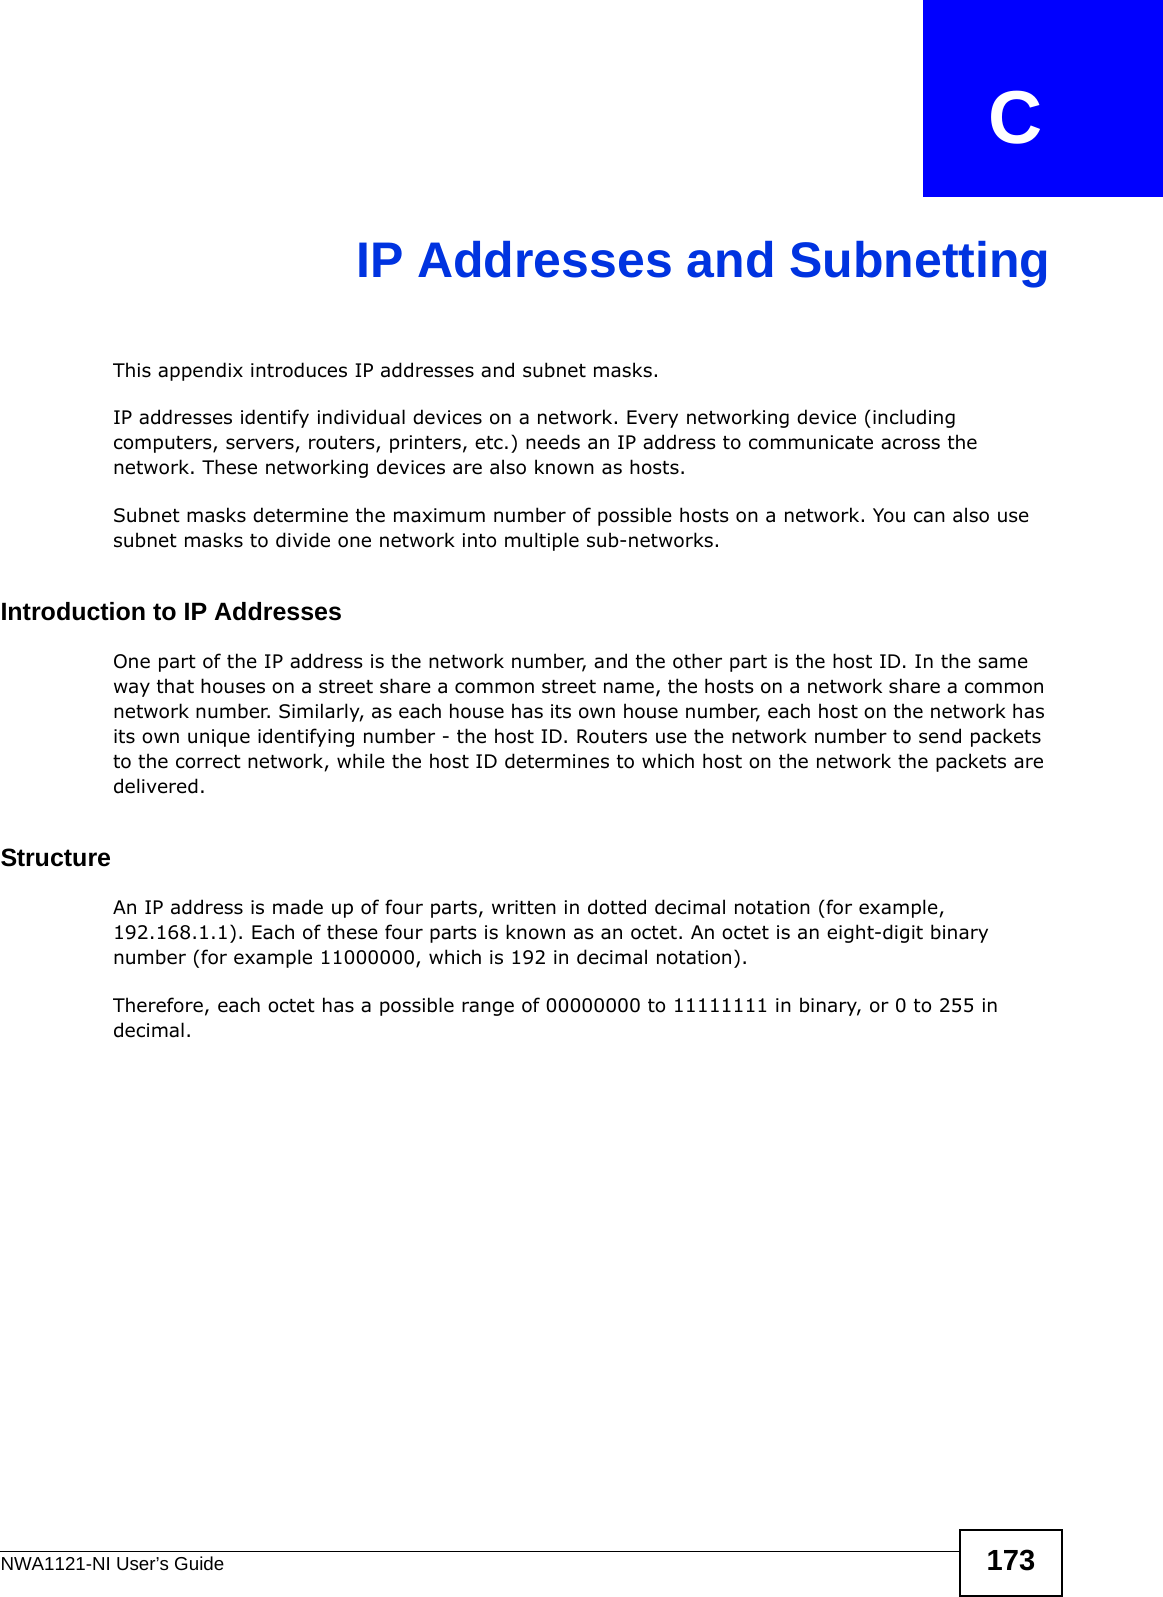 NWA1121-NI User’s Guide 173APPENDIX   CIP Addresses and SubnettingThis appendix introduces IP addresses and subnet masks. IP addresses identify individual devices on a network. Every networking device (including computers, servers, routers, printers, etc.) needs an IP address to communicate across the network. These networking devices are also known as hosts.Subnet masks determine the maximum number of possible hosts on a network. You can also use subnet masks to divide one network into multiple sub-networks.Introduction to IP AddressesOne part of the IP address is the network number, and the other part is the host ID. In the same way that houses on a street share a common street name, the hosts on a network share a common network number. Similarly, as each house has its own house number, each host on the network has its own unique identifying number - the host ID. Routers use the network number to send packets to the correct network, while the host ID determines to which host on the network the packets are delivered.StructureAn IP address is made up of four parts, written in dotted decimal notation (for example, 192.168.1.1). Each of these four parts is known as an octet. An octet is an eight-digit binary number (for example 11000000, which is 192 in decimal notation). Therefore, each octet has a possible range of 00000000 to 11111111 in binary, or 0 to 255 in decimal.